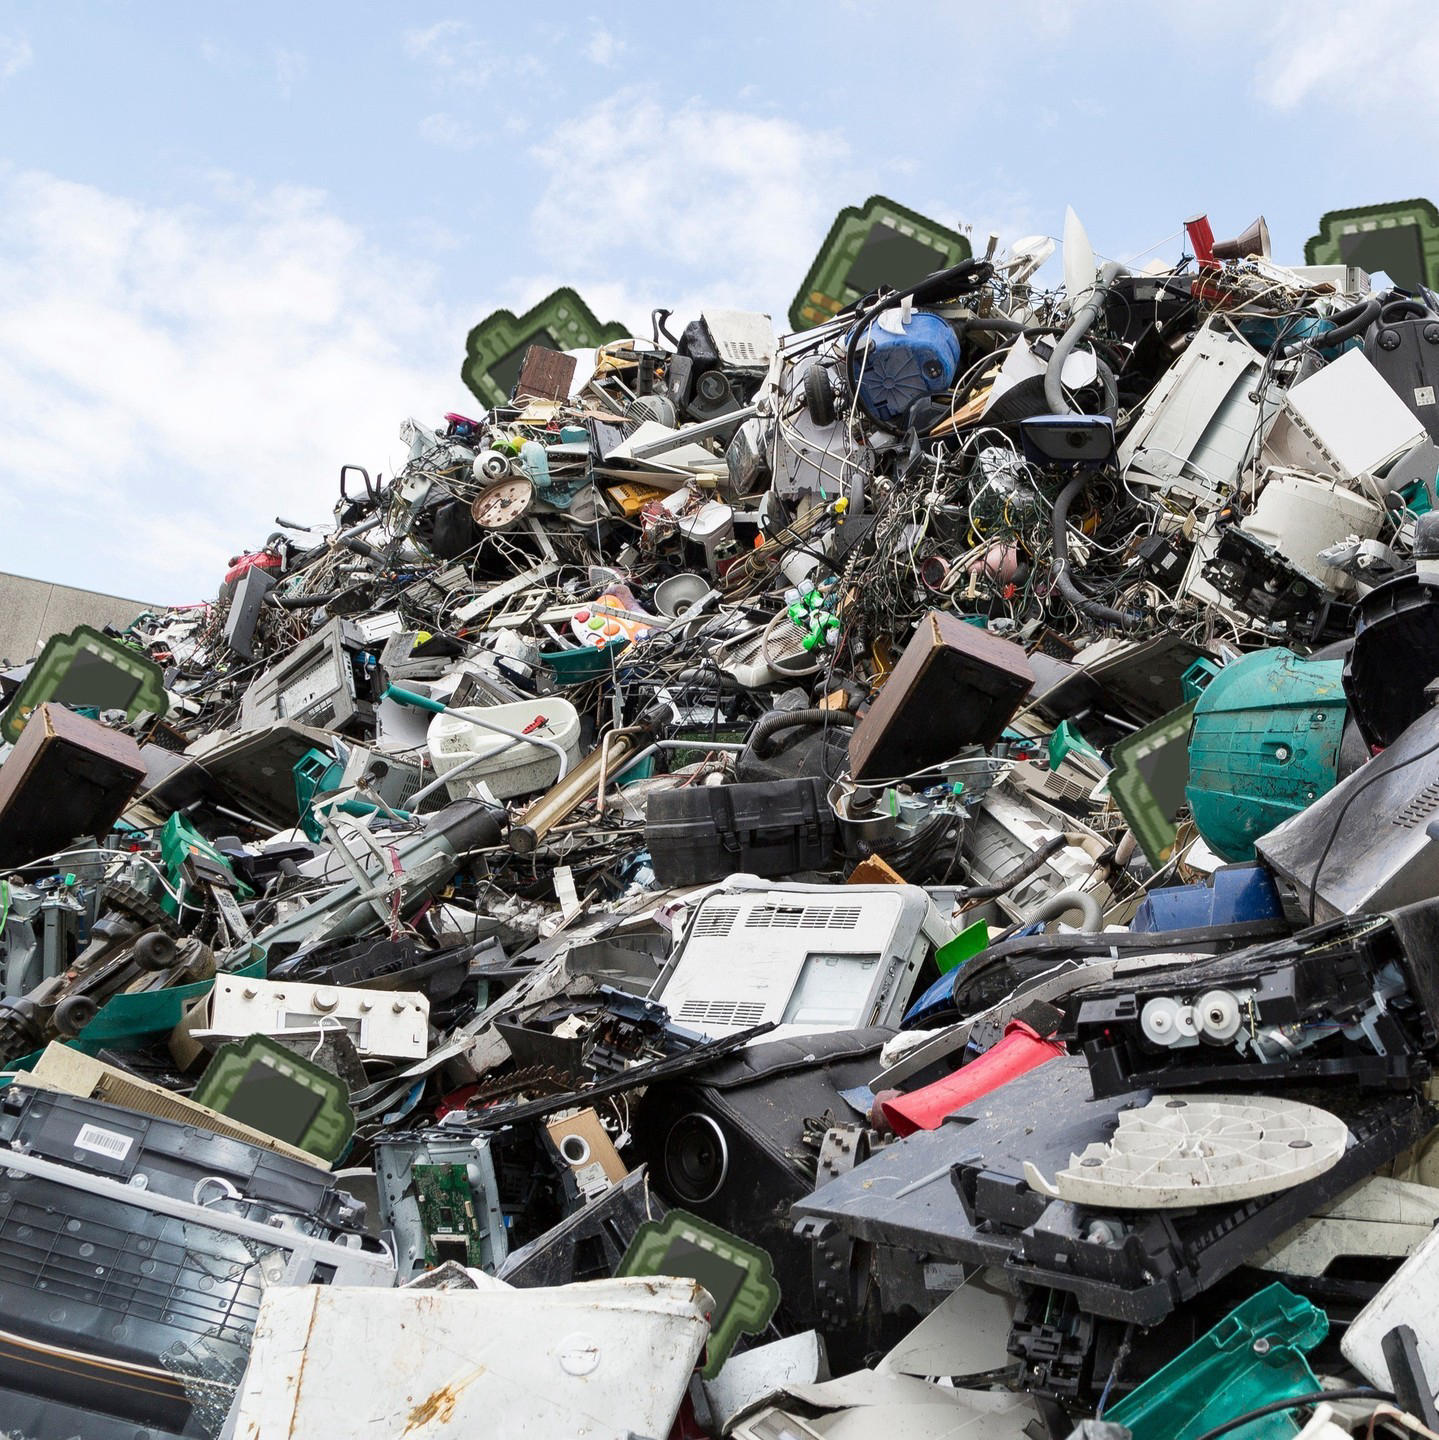 image  1 Intel - Did you know that 54 million tons of electronics get trashed every year